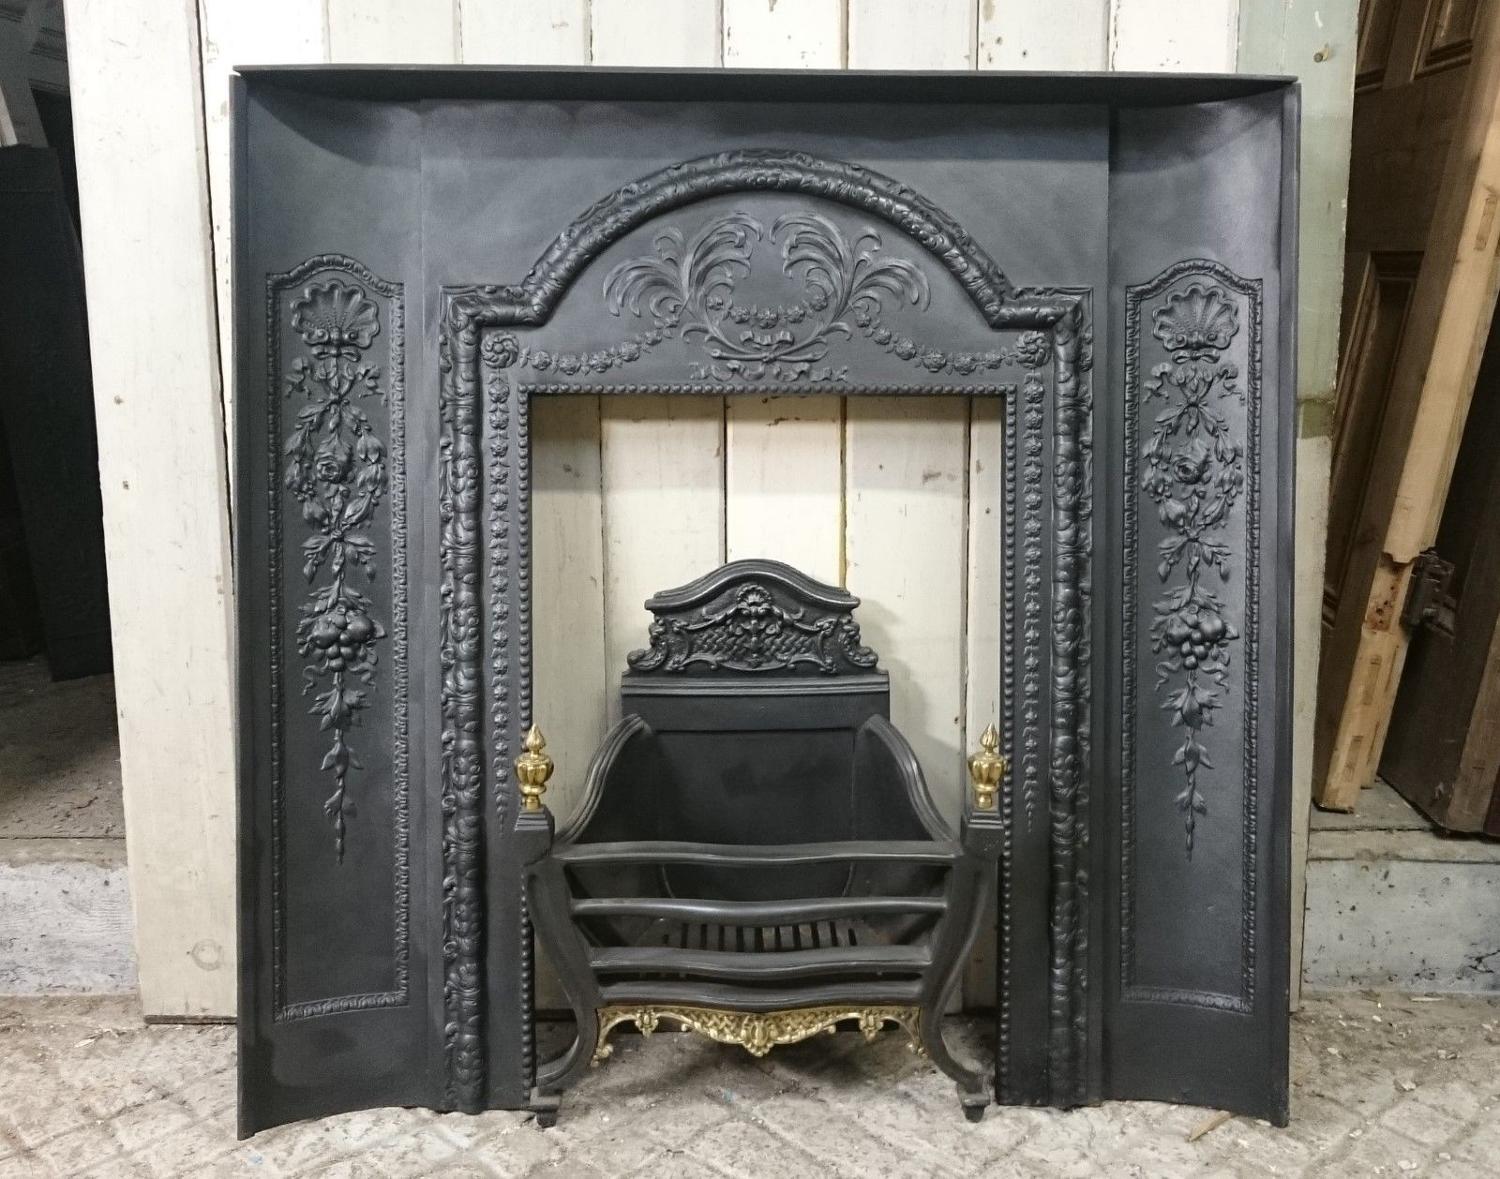 1077 EDWARDIAN CAST IRON FIRE FRONT WITH CURVED FIRE CHEEKS